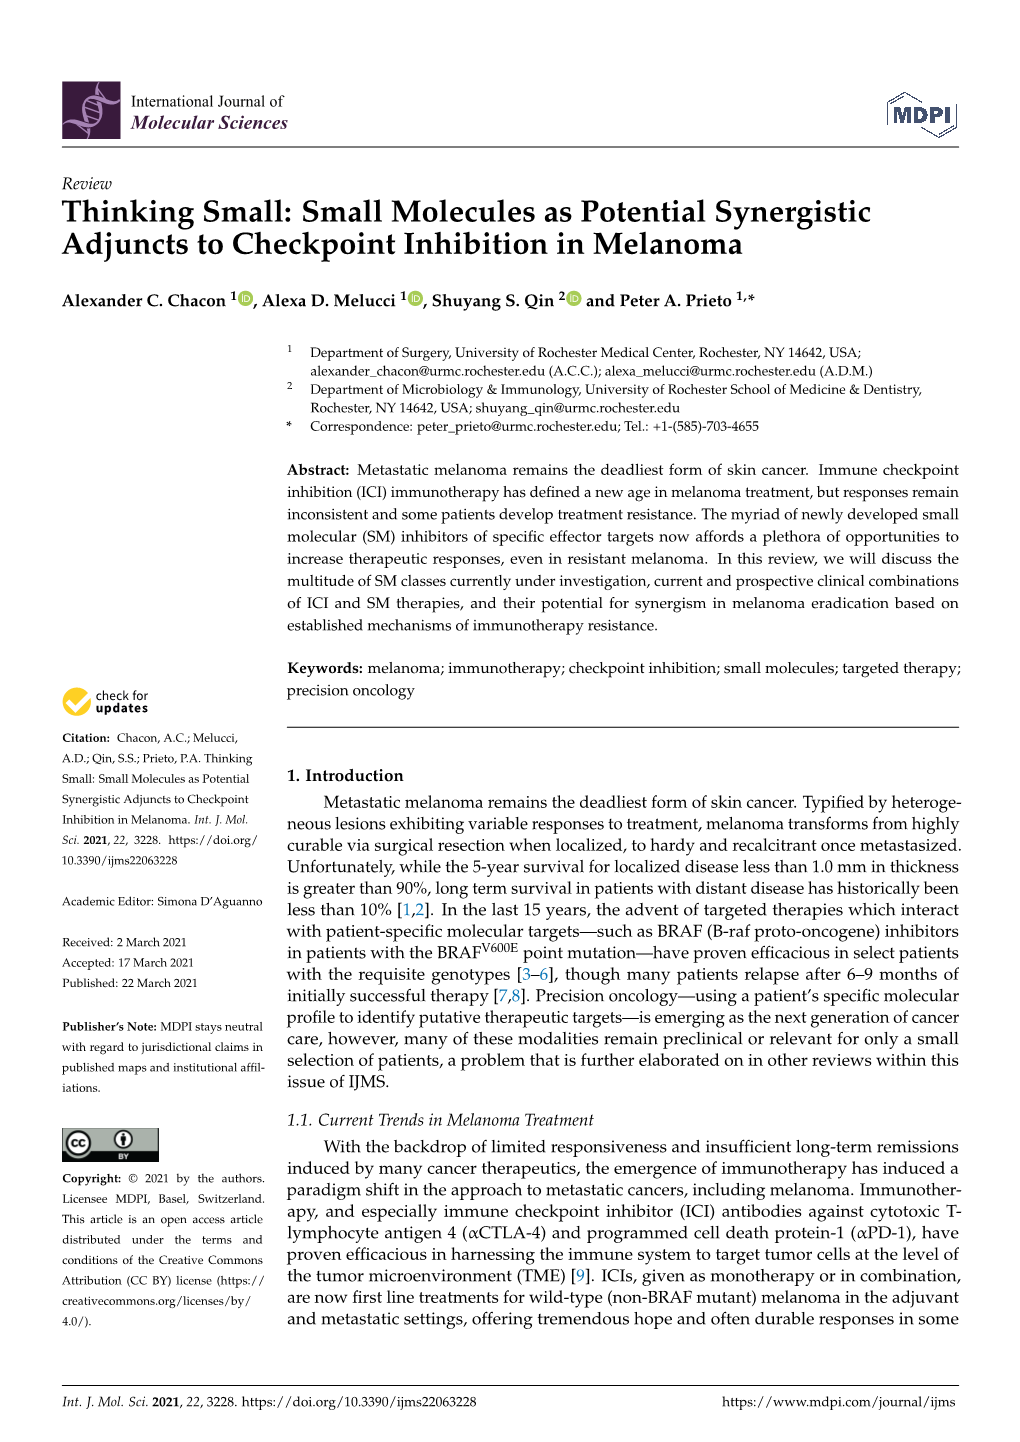 Small Molecules As Potential Synergistic Adjuncts to Checkpoint Inhibition in Melanoma